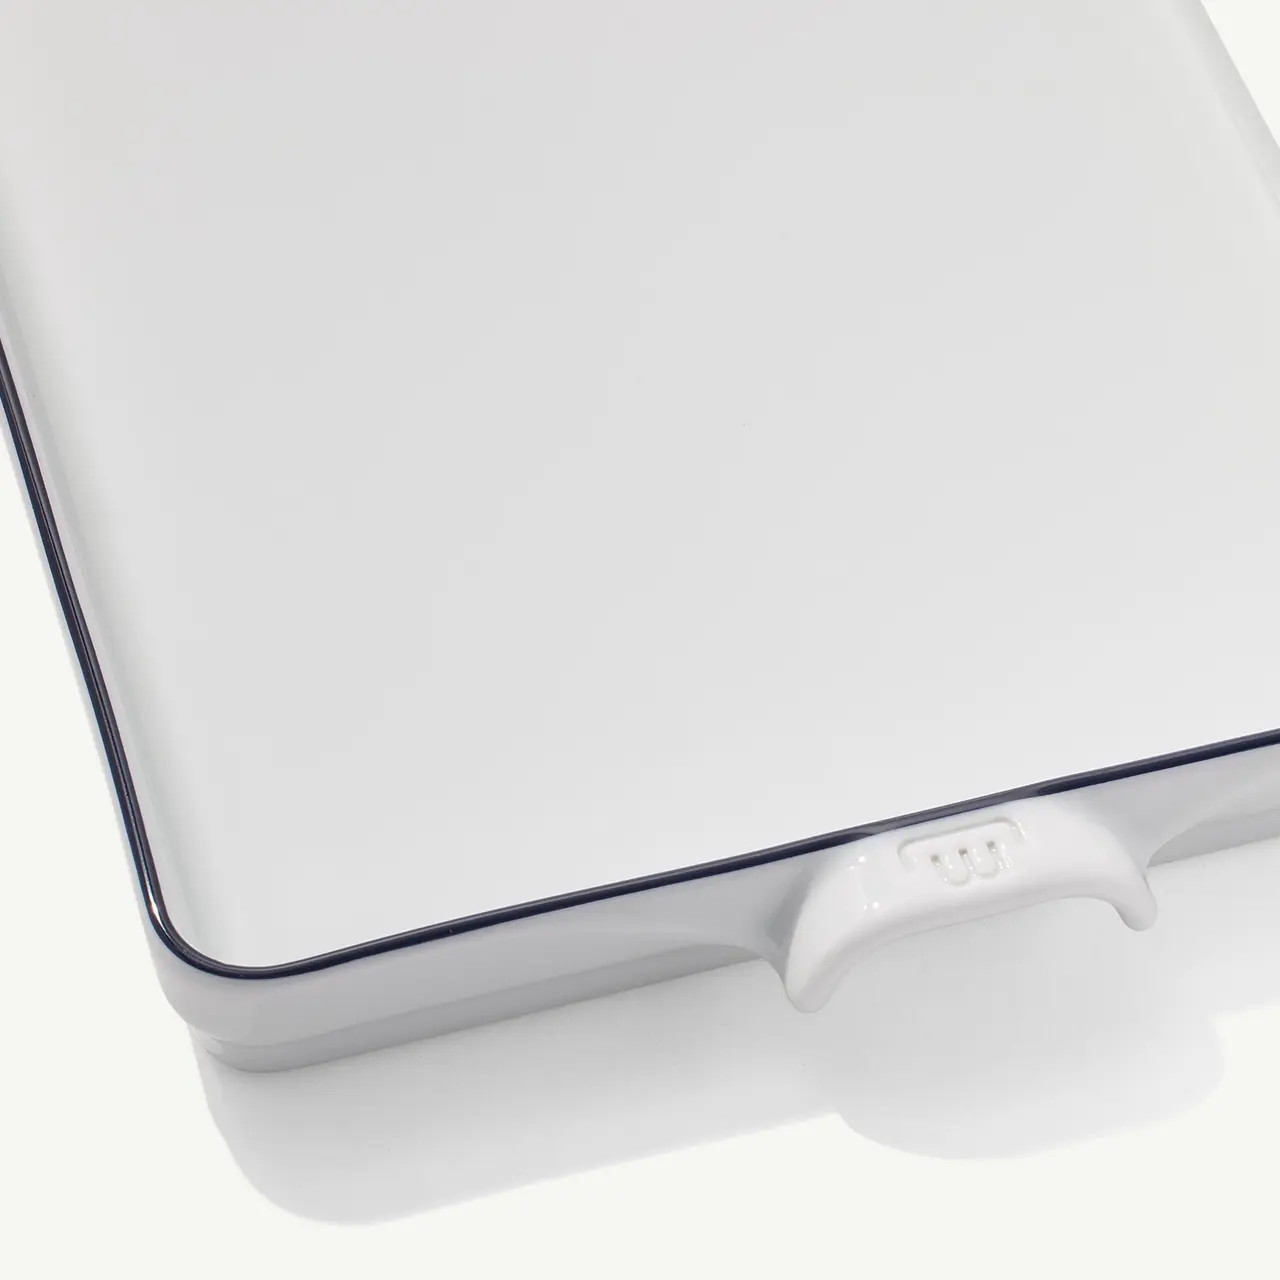 A close-up view of a white laptop corner with a distinctive blue edge and a small visible logo on its hinge against a white background.